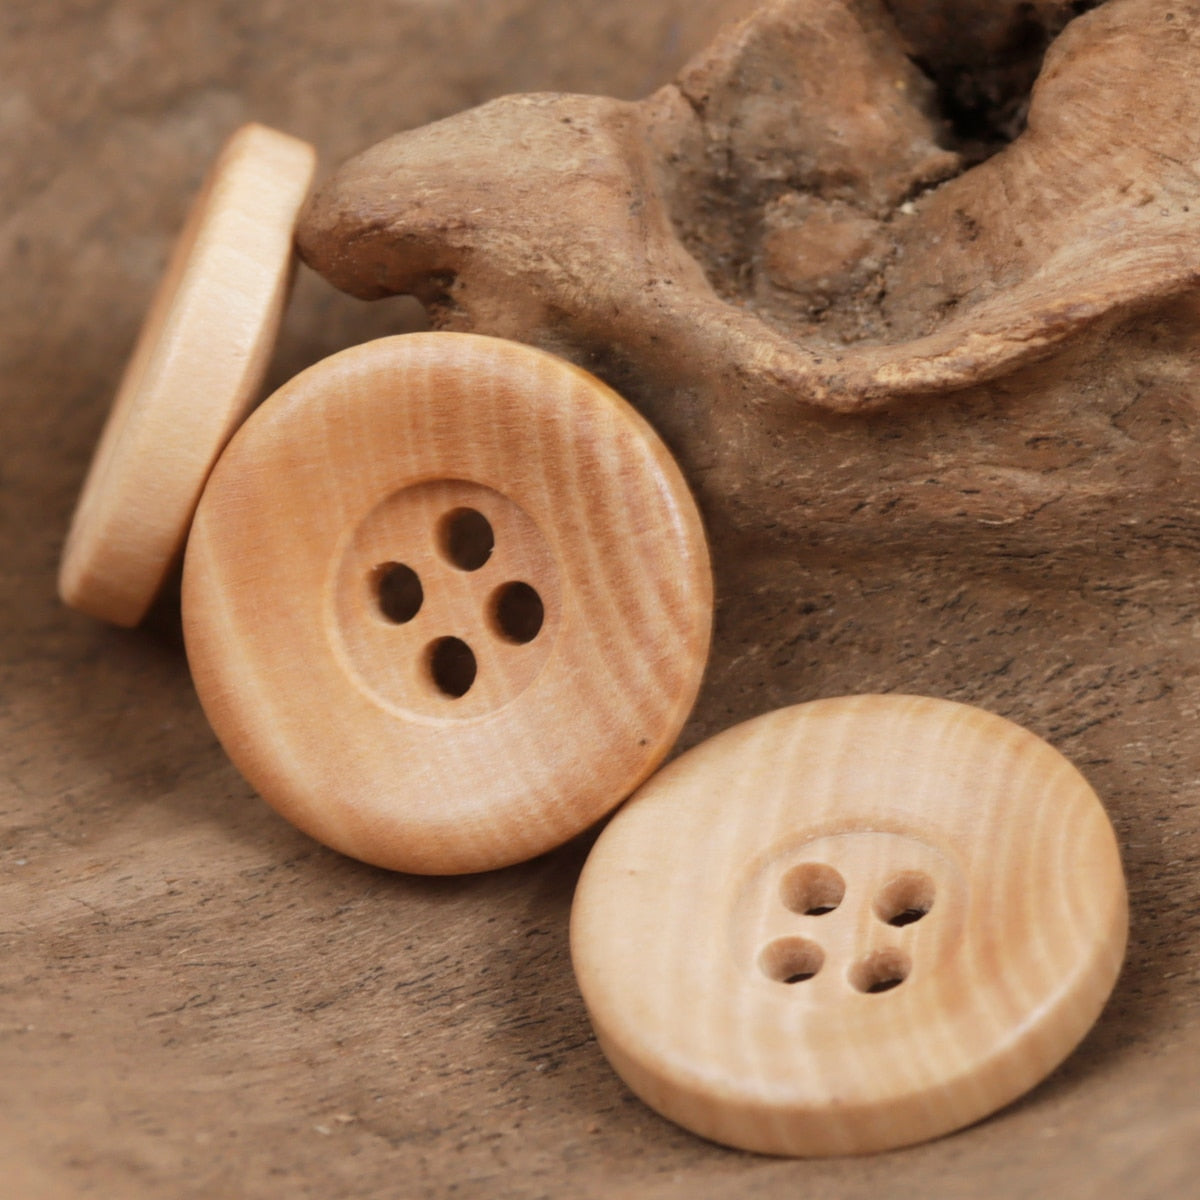 10pcs Wide Rim Wood ButtonsFor Clothing  Additive-free Sewing Accessories DIY